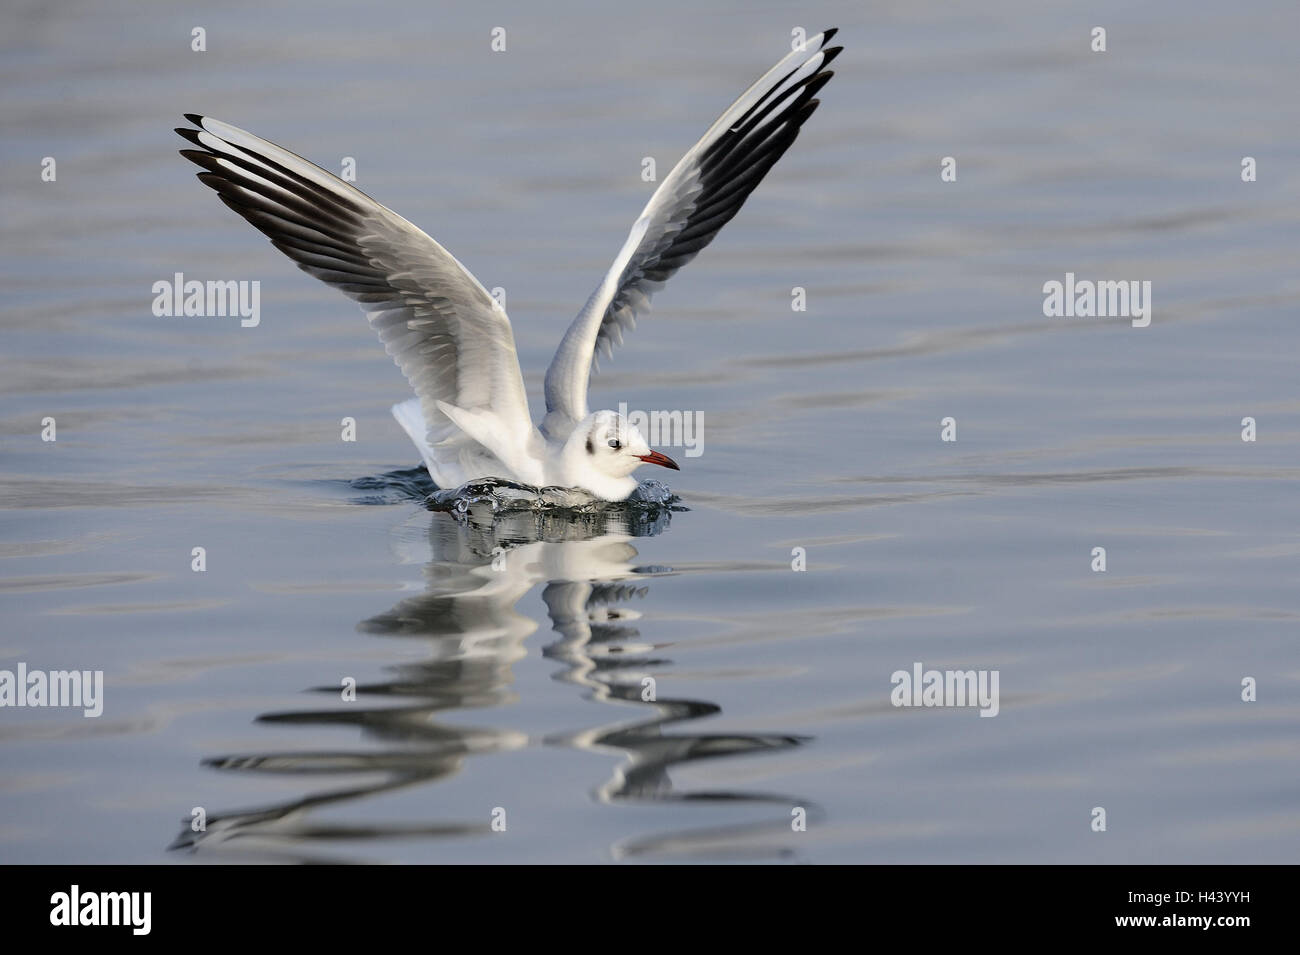 Black-headed gull, Larus ridibundus, swim, water surface, nature, animal, bird, gull, wing, stretched out, flapping of wings, whole body, waves, reflexion, water surface, Stock Photo